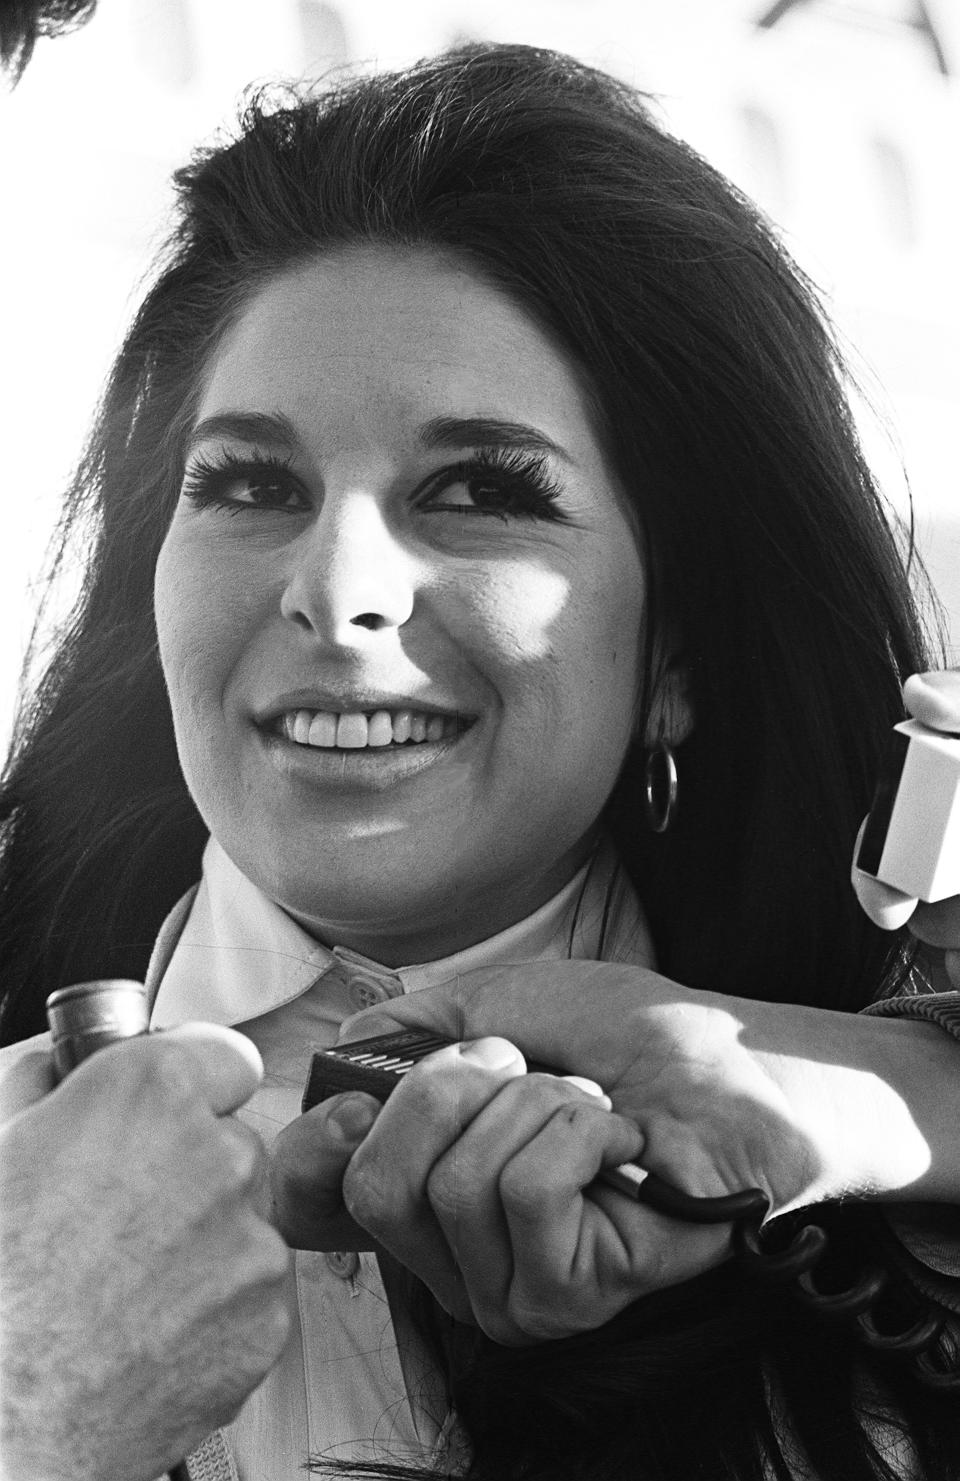 Singer Bobbie Gentry talks to reporters outside the Nashville airport in 1967.